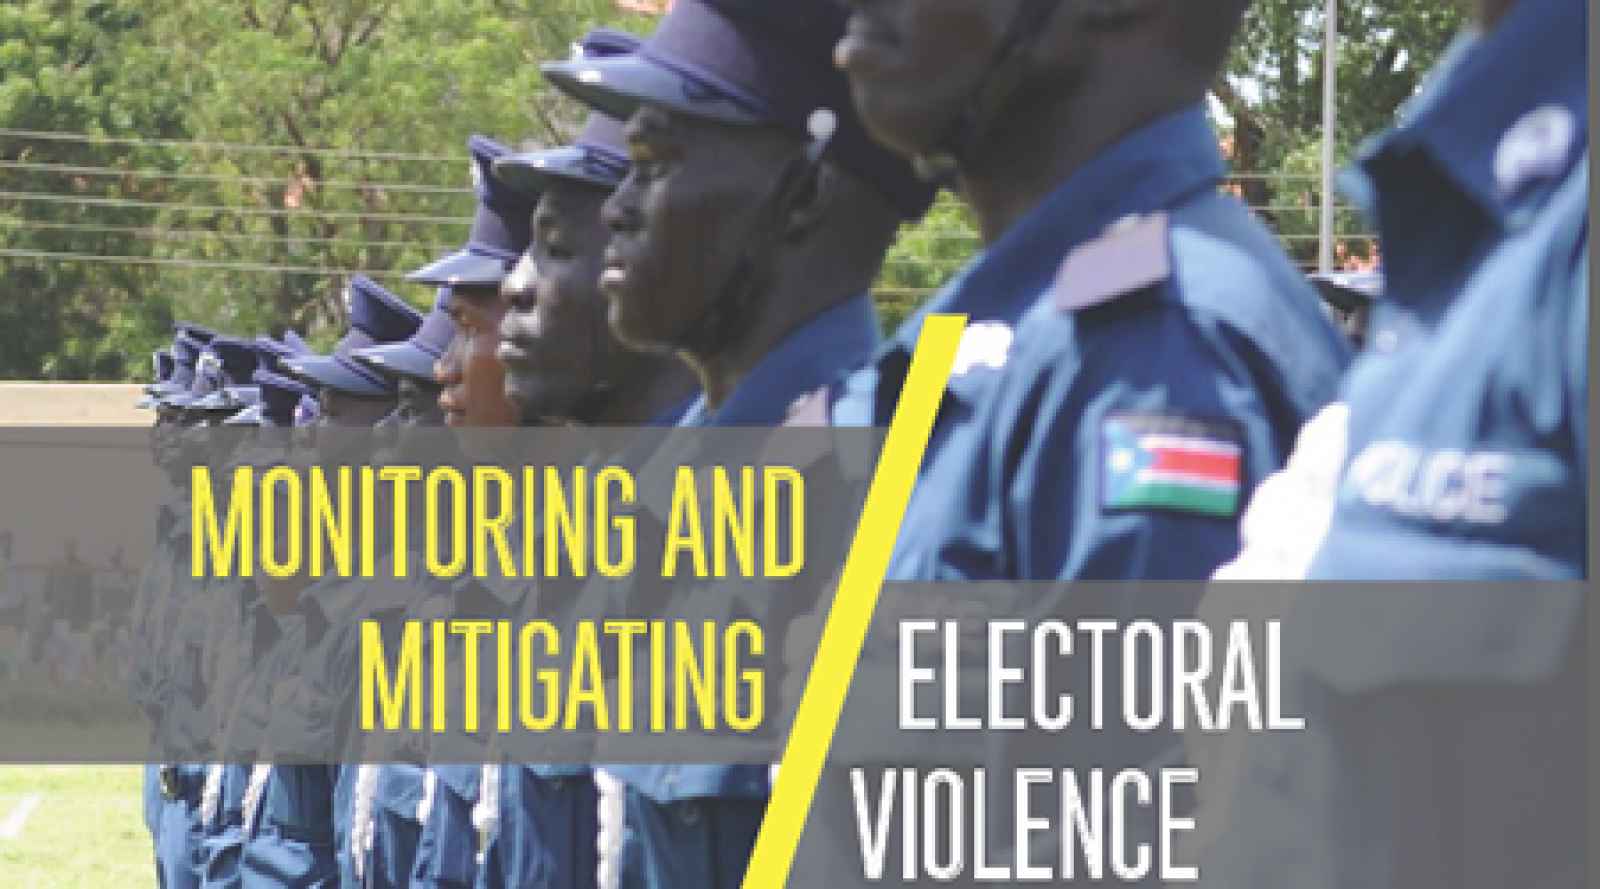 New NDI Guide Looks at Ways to Curb Electoral Violence